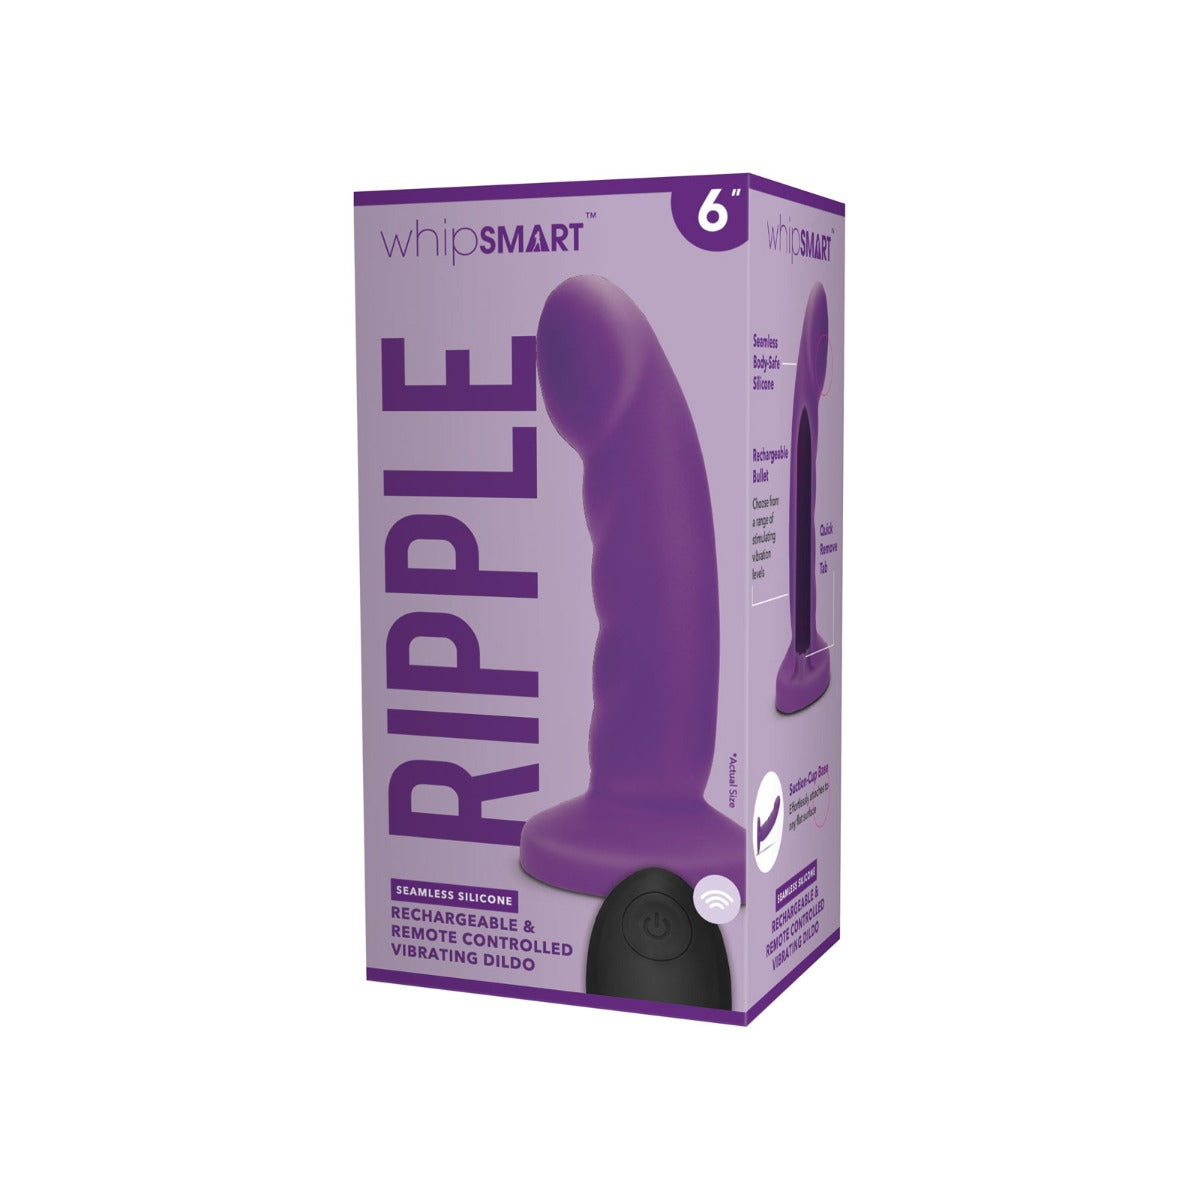 Suction Base Dildos Whipsmart 6 Inch Curved Ripple Remote Control Dildo - Purple   